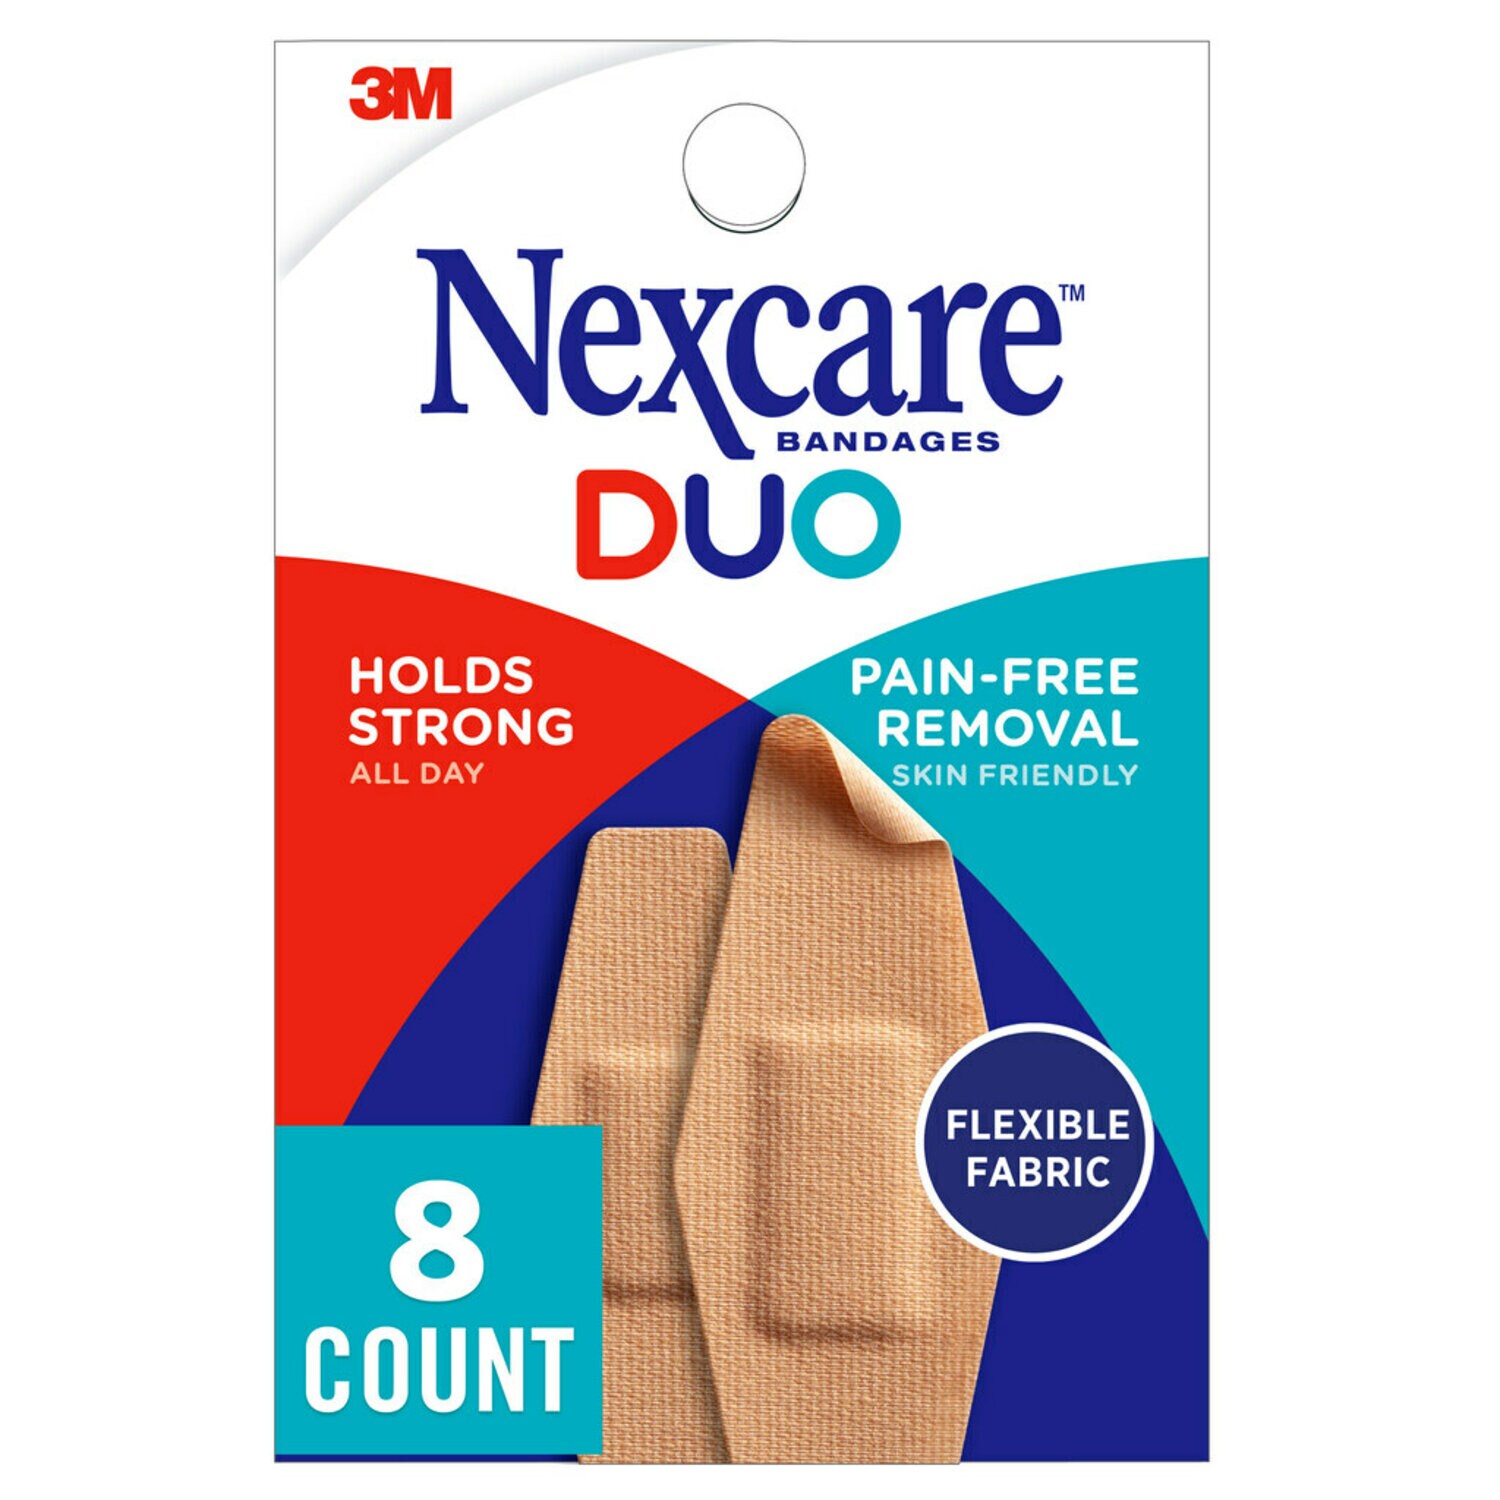 7100242585 - Nexcare DUO Bandages DSA-8CP, Convience Pack, 8ct